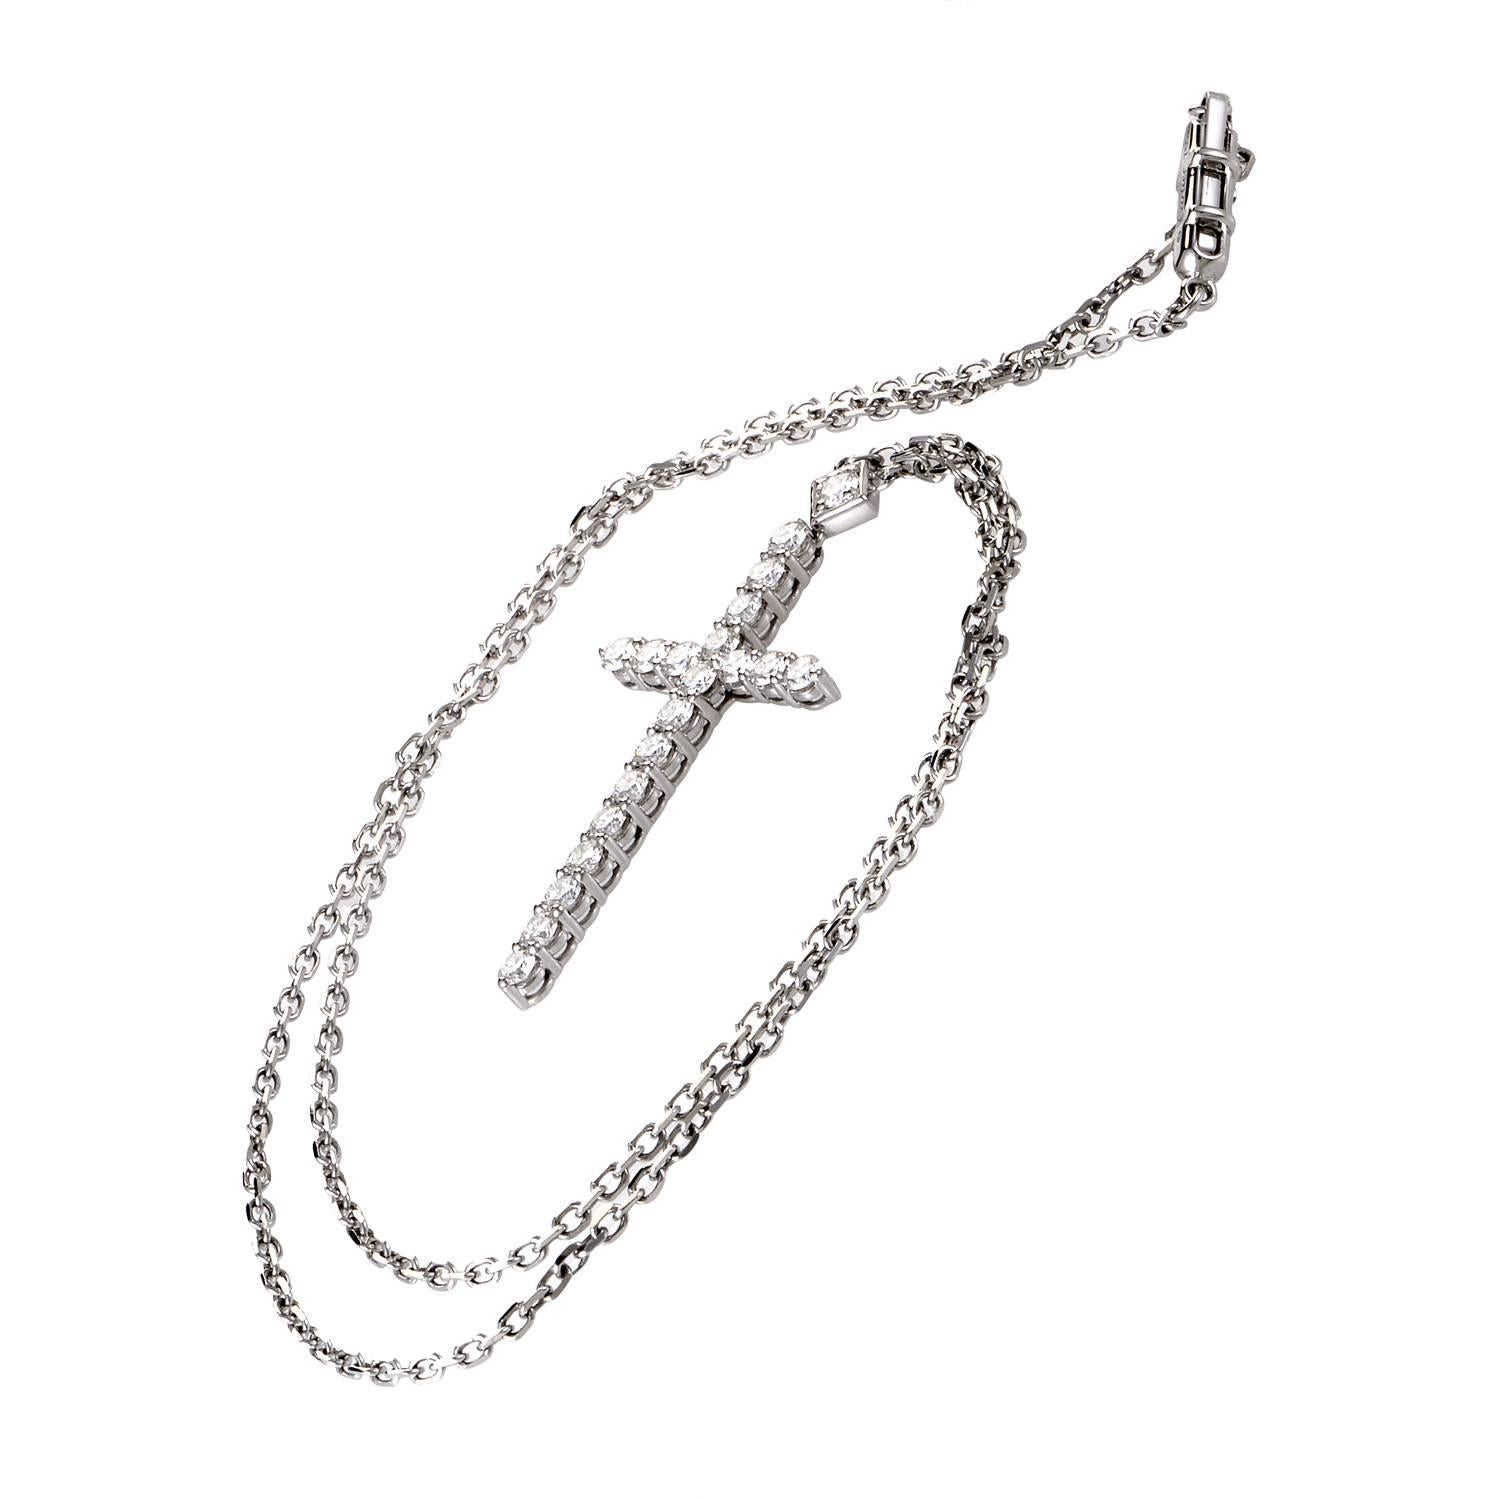 Cartier adds luxury to majesty with a necklace suspending a finely forged cross motif. Thin links of 18K white gold drop over a dazzling junction of 1.50ct diamonds. A single, larger cut of diamond rests at its crown. This fine example of luxury